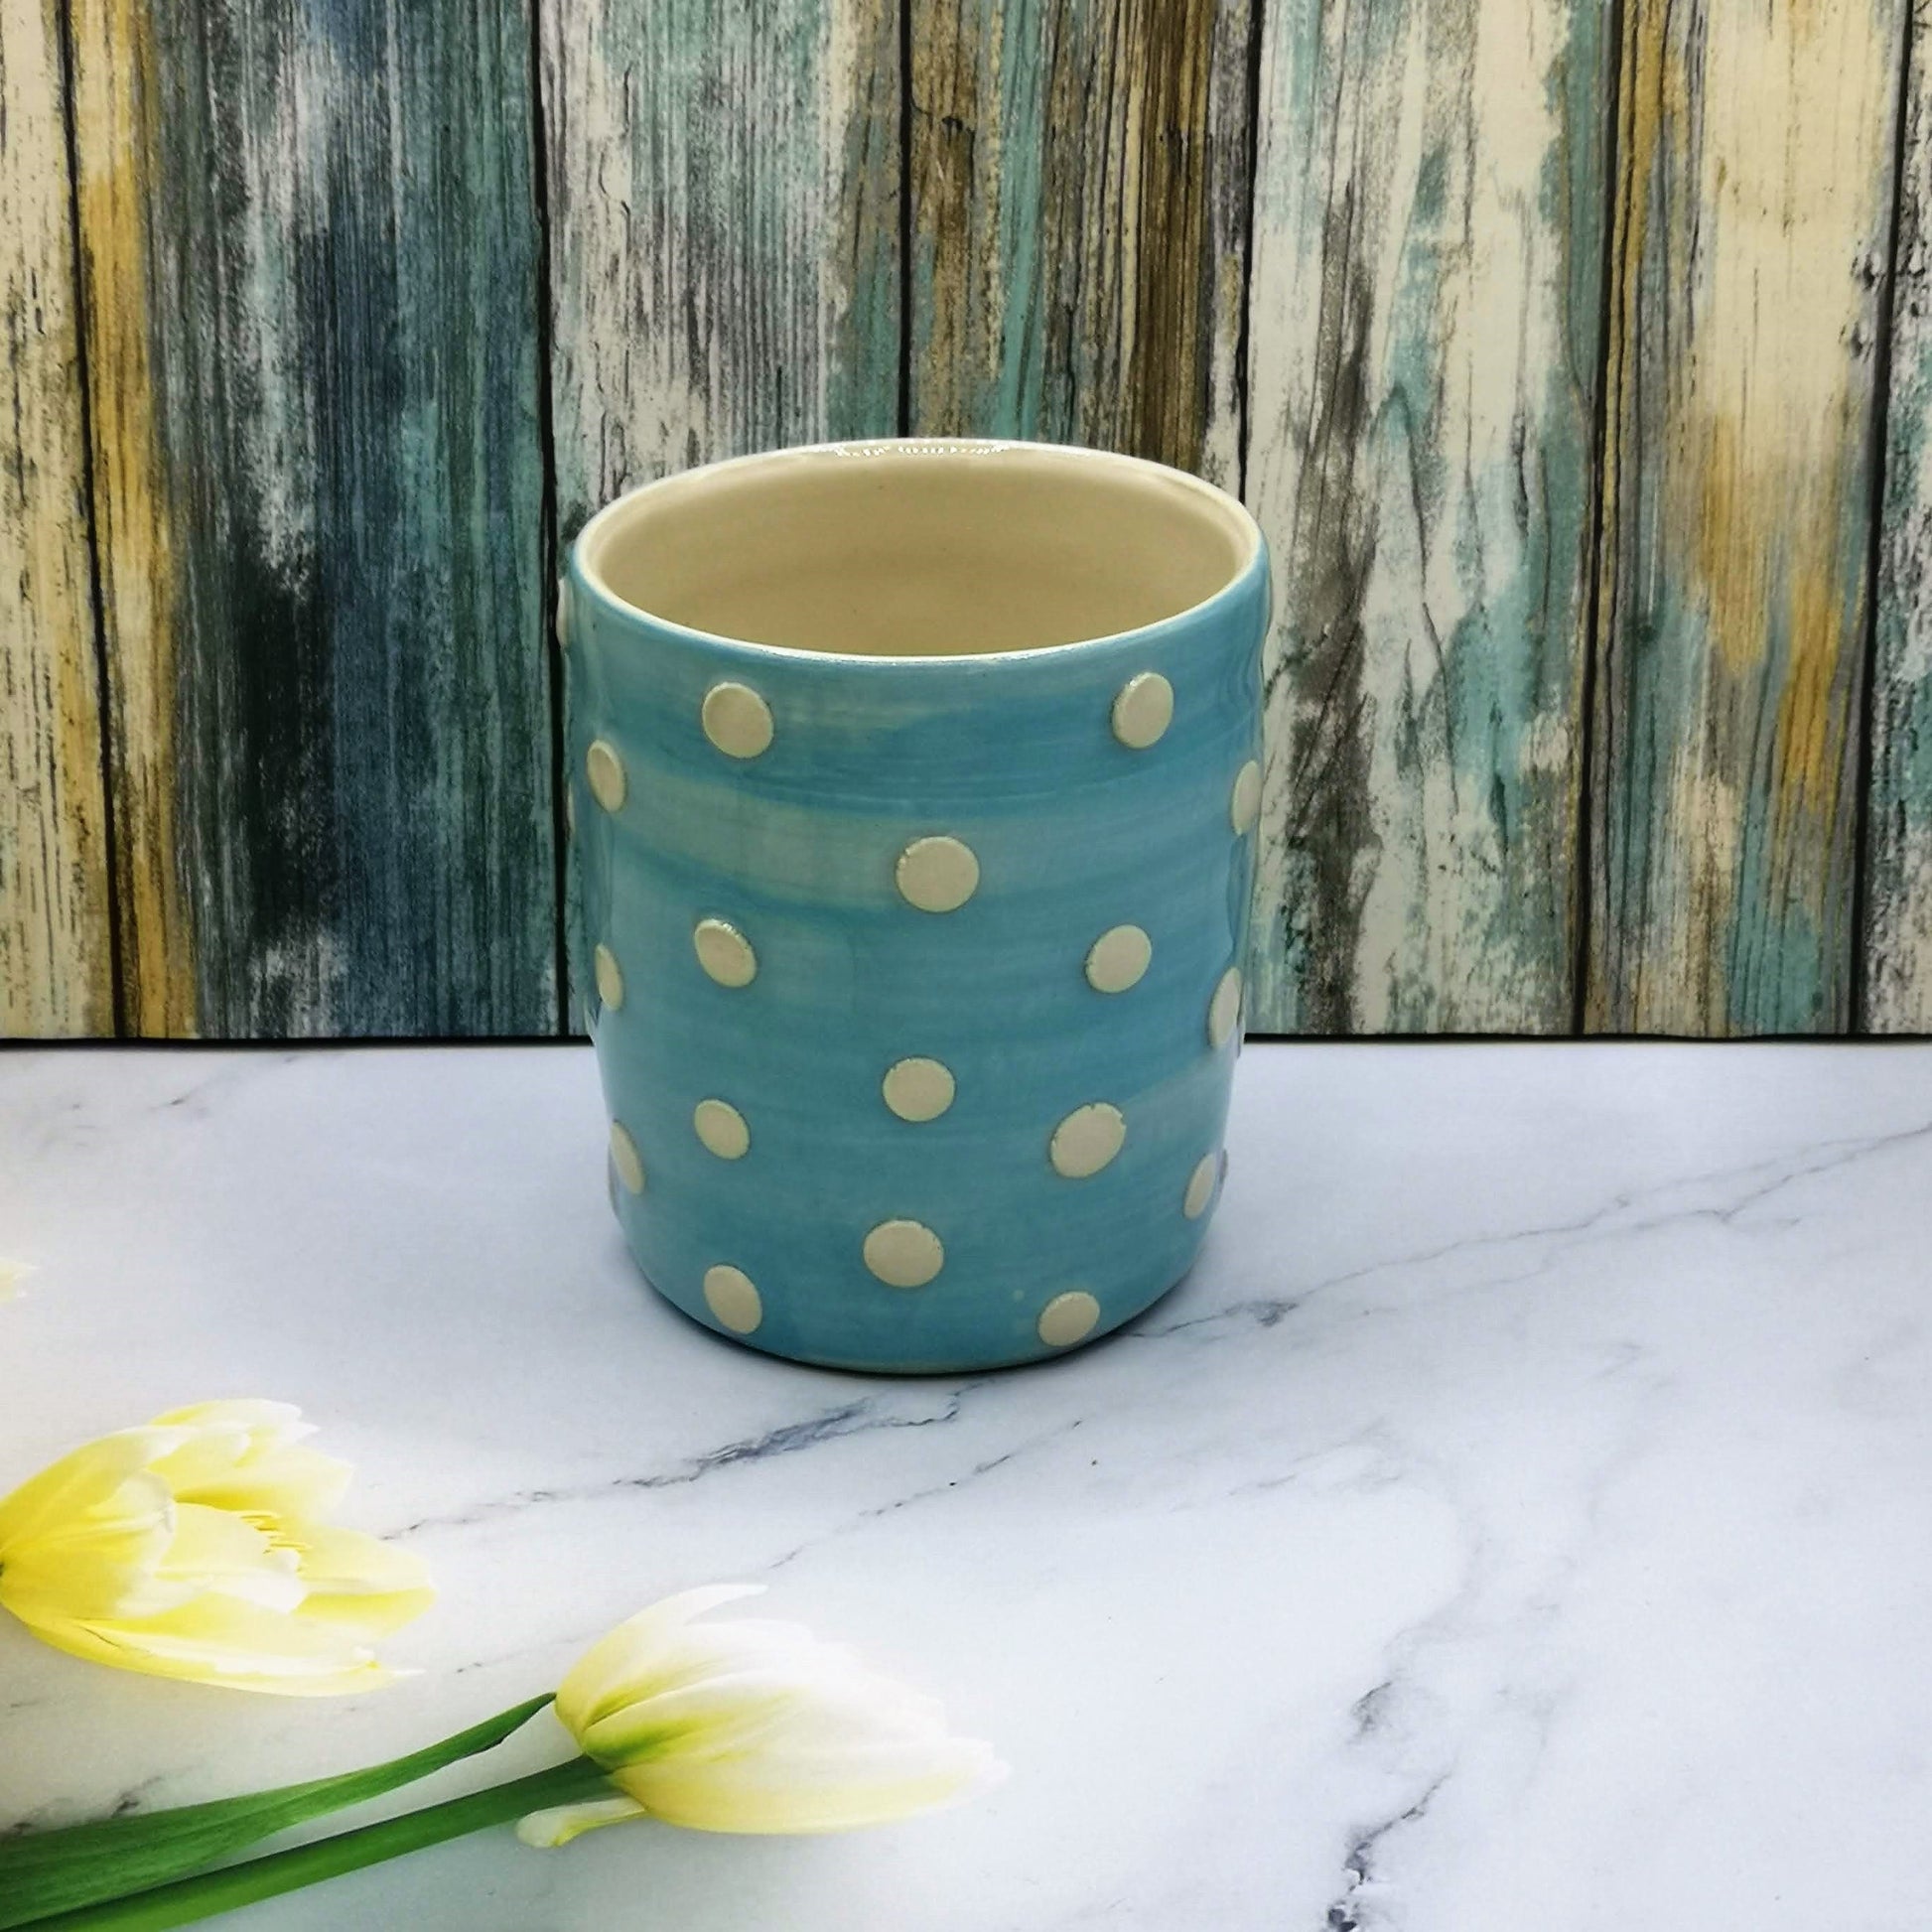 Large Utensil Holder For Kitchen Counter, Utensil Organizer Blue With White Dots, Unique Wedding Gift For Couple, Handmade New Home Gift - Ceramica Ana Rafael